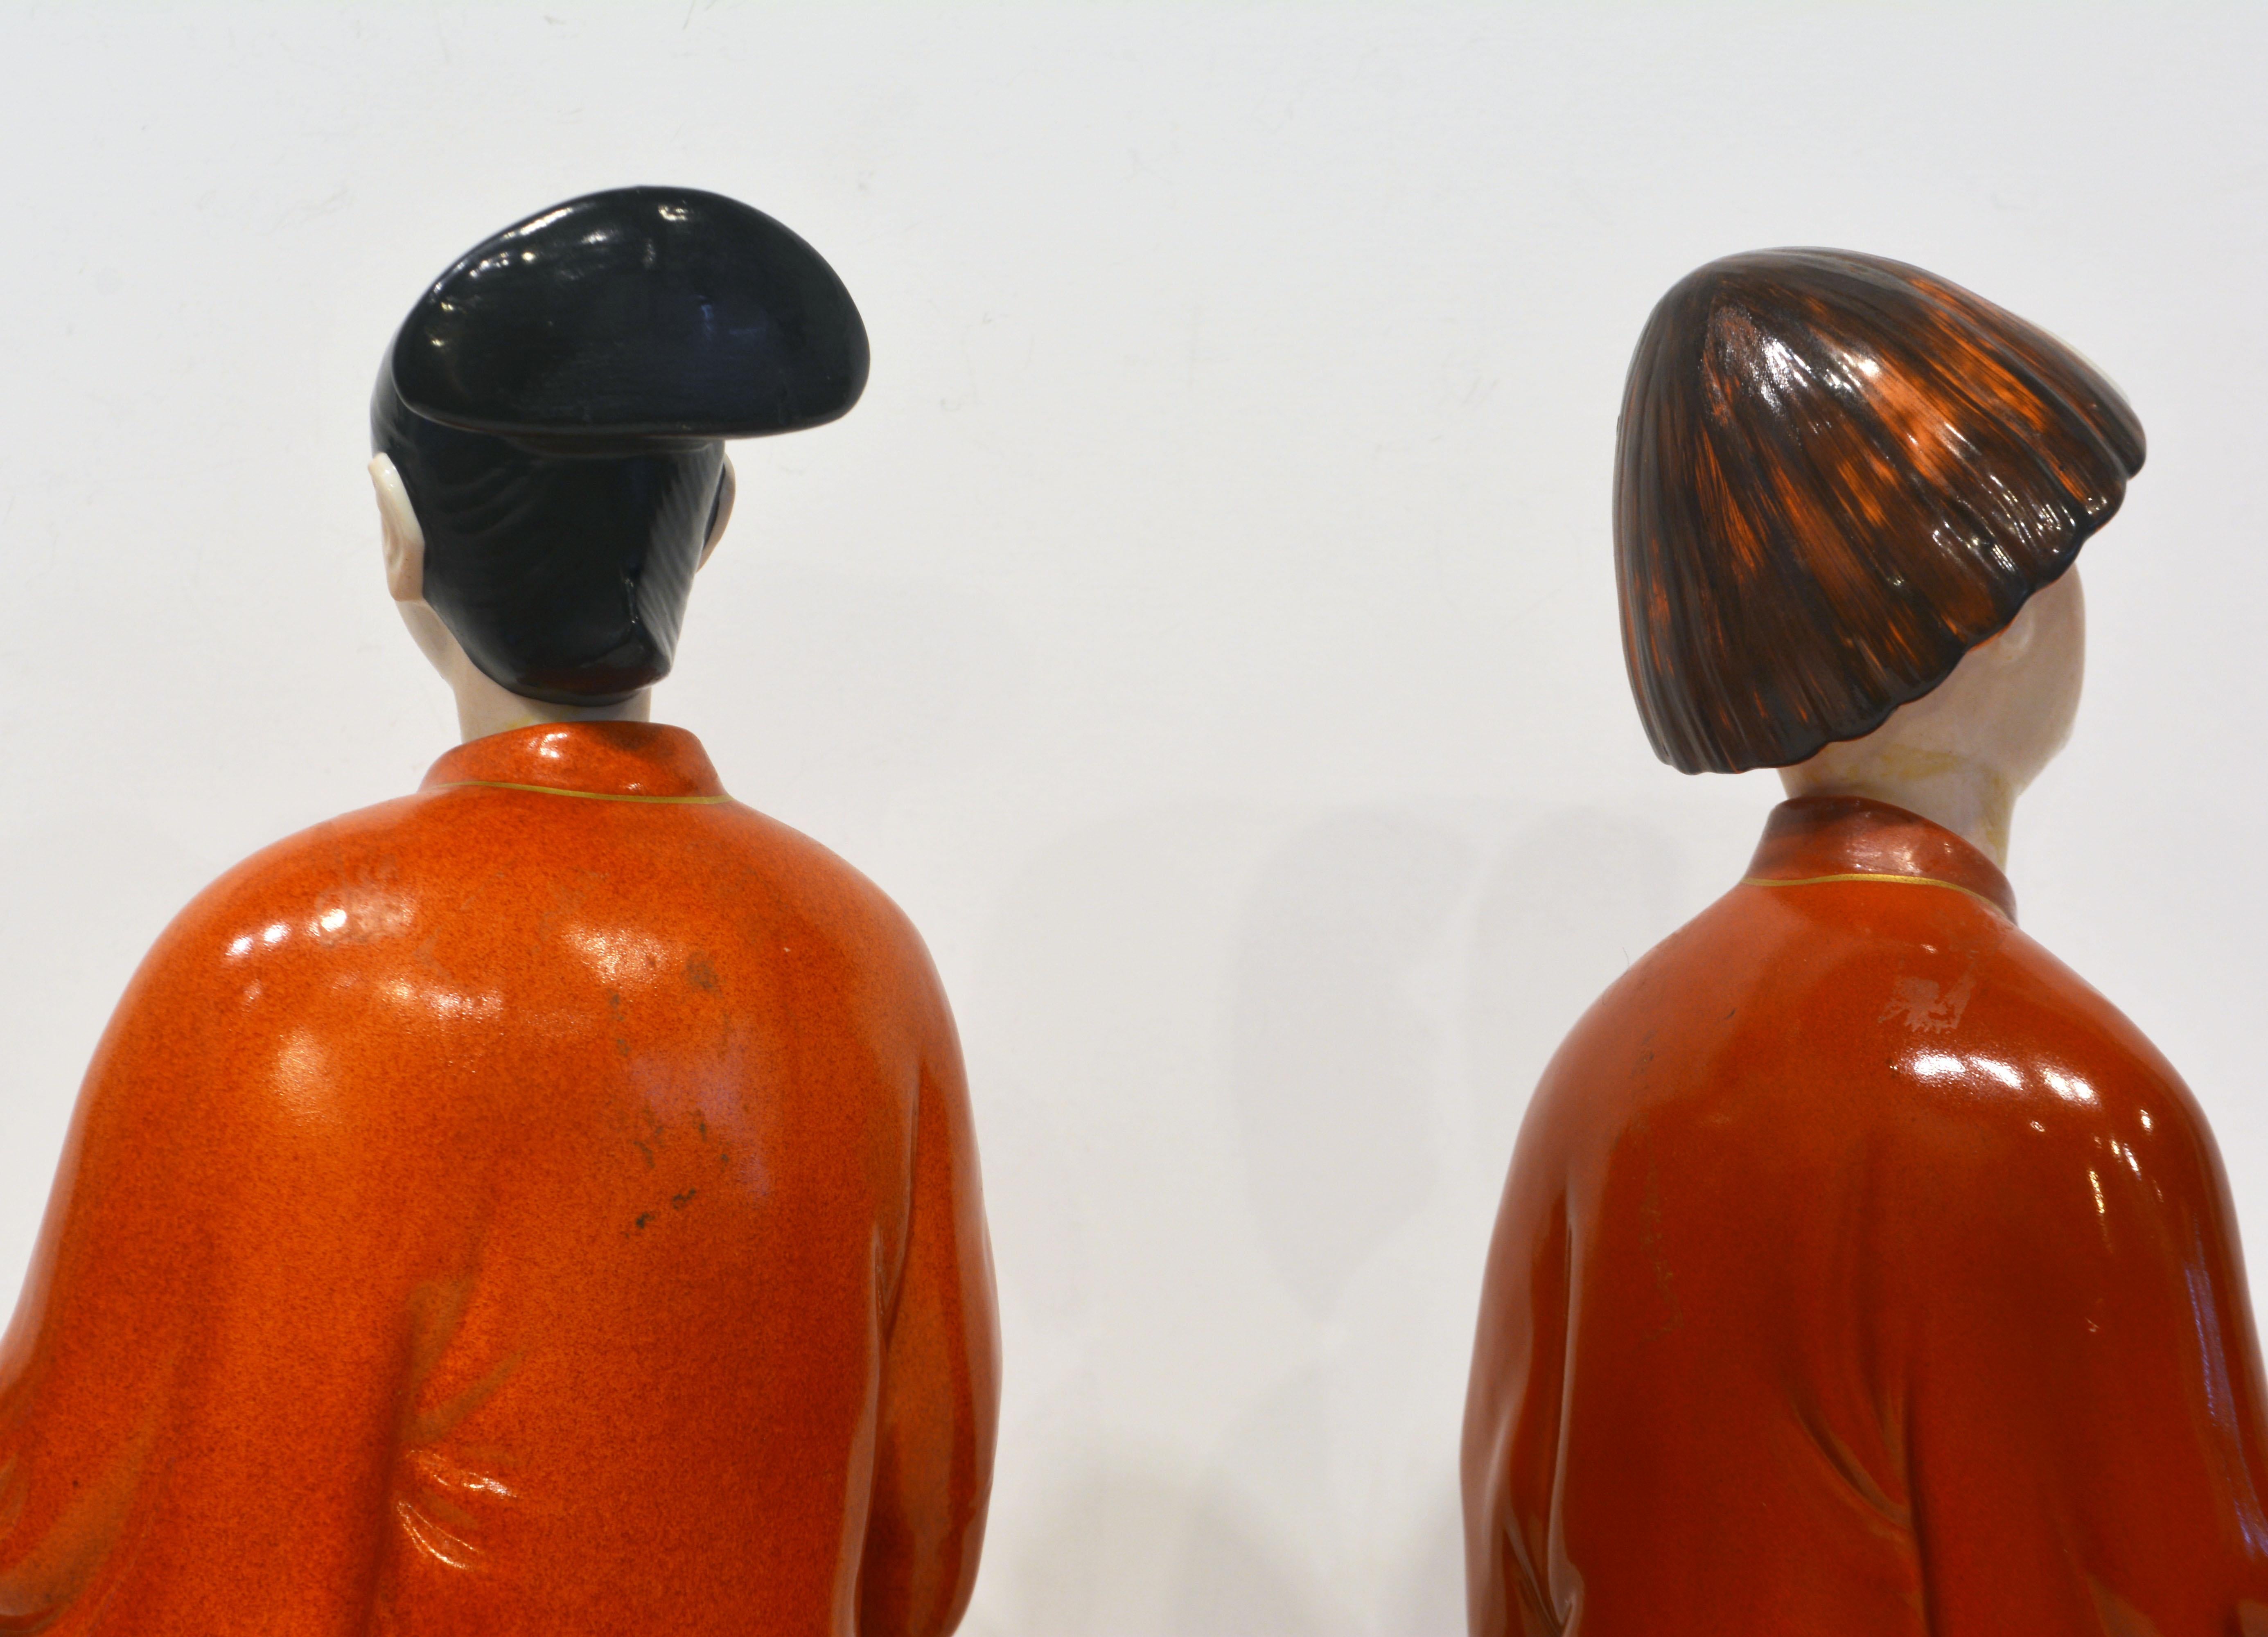 20th Century Chinese Export Style Porcelain Nodding Head Mandarins by Mottahedeh, Italy, Pair